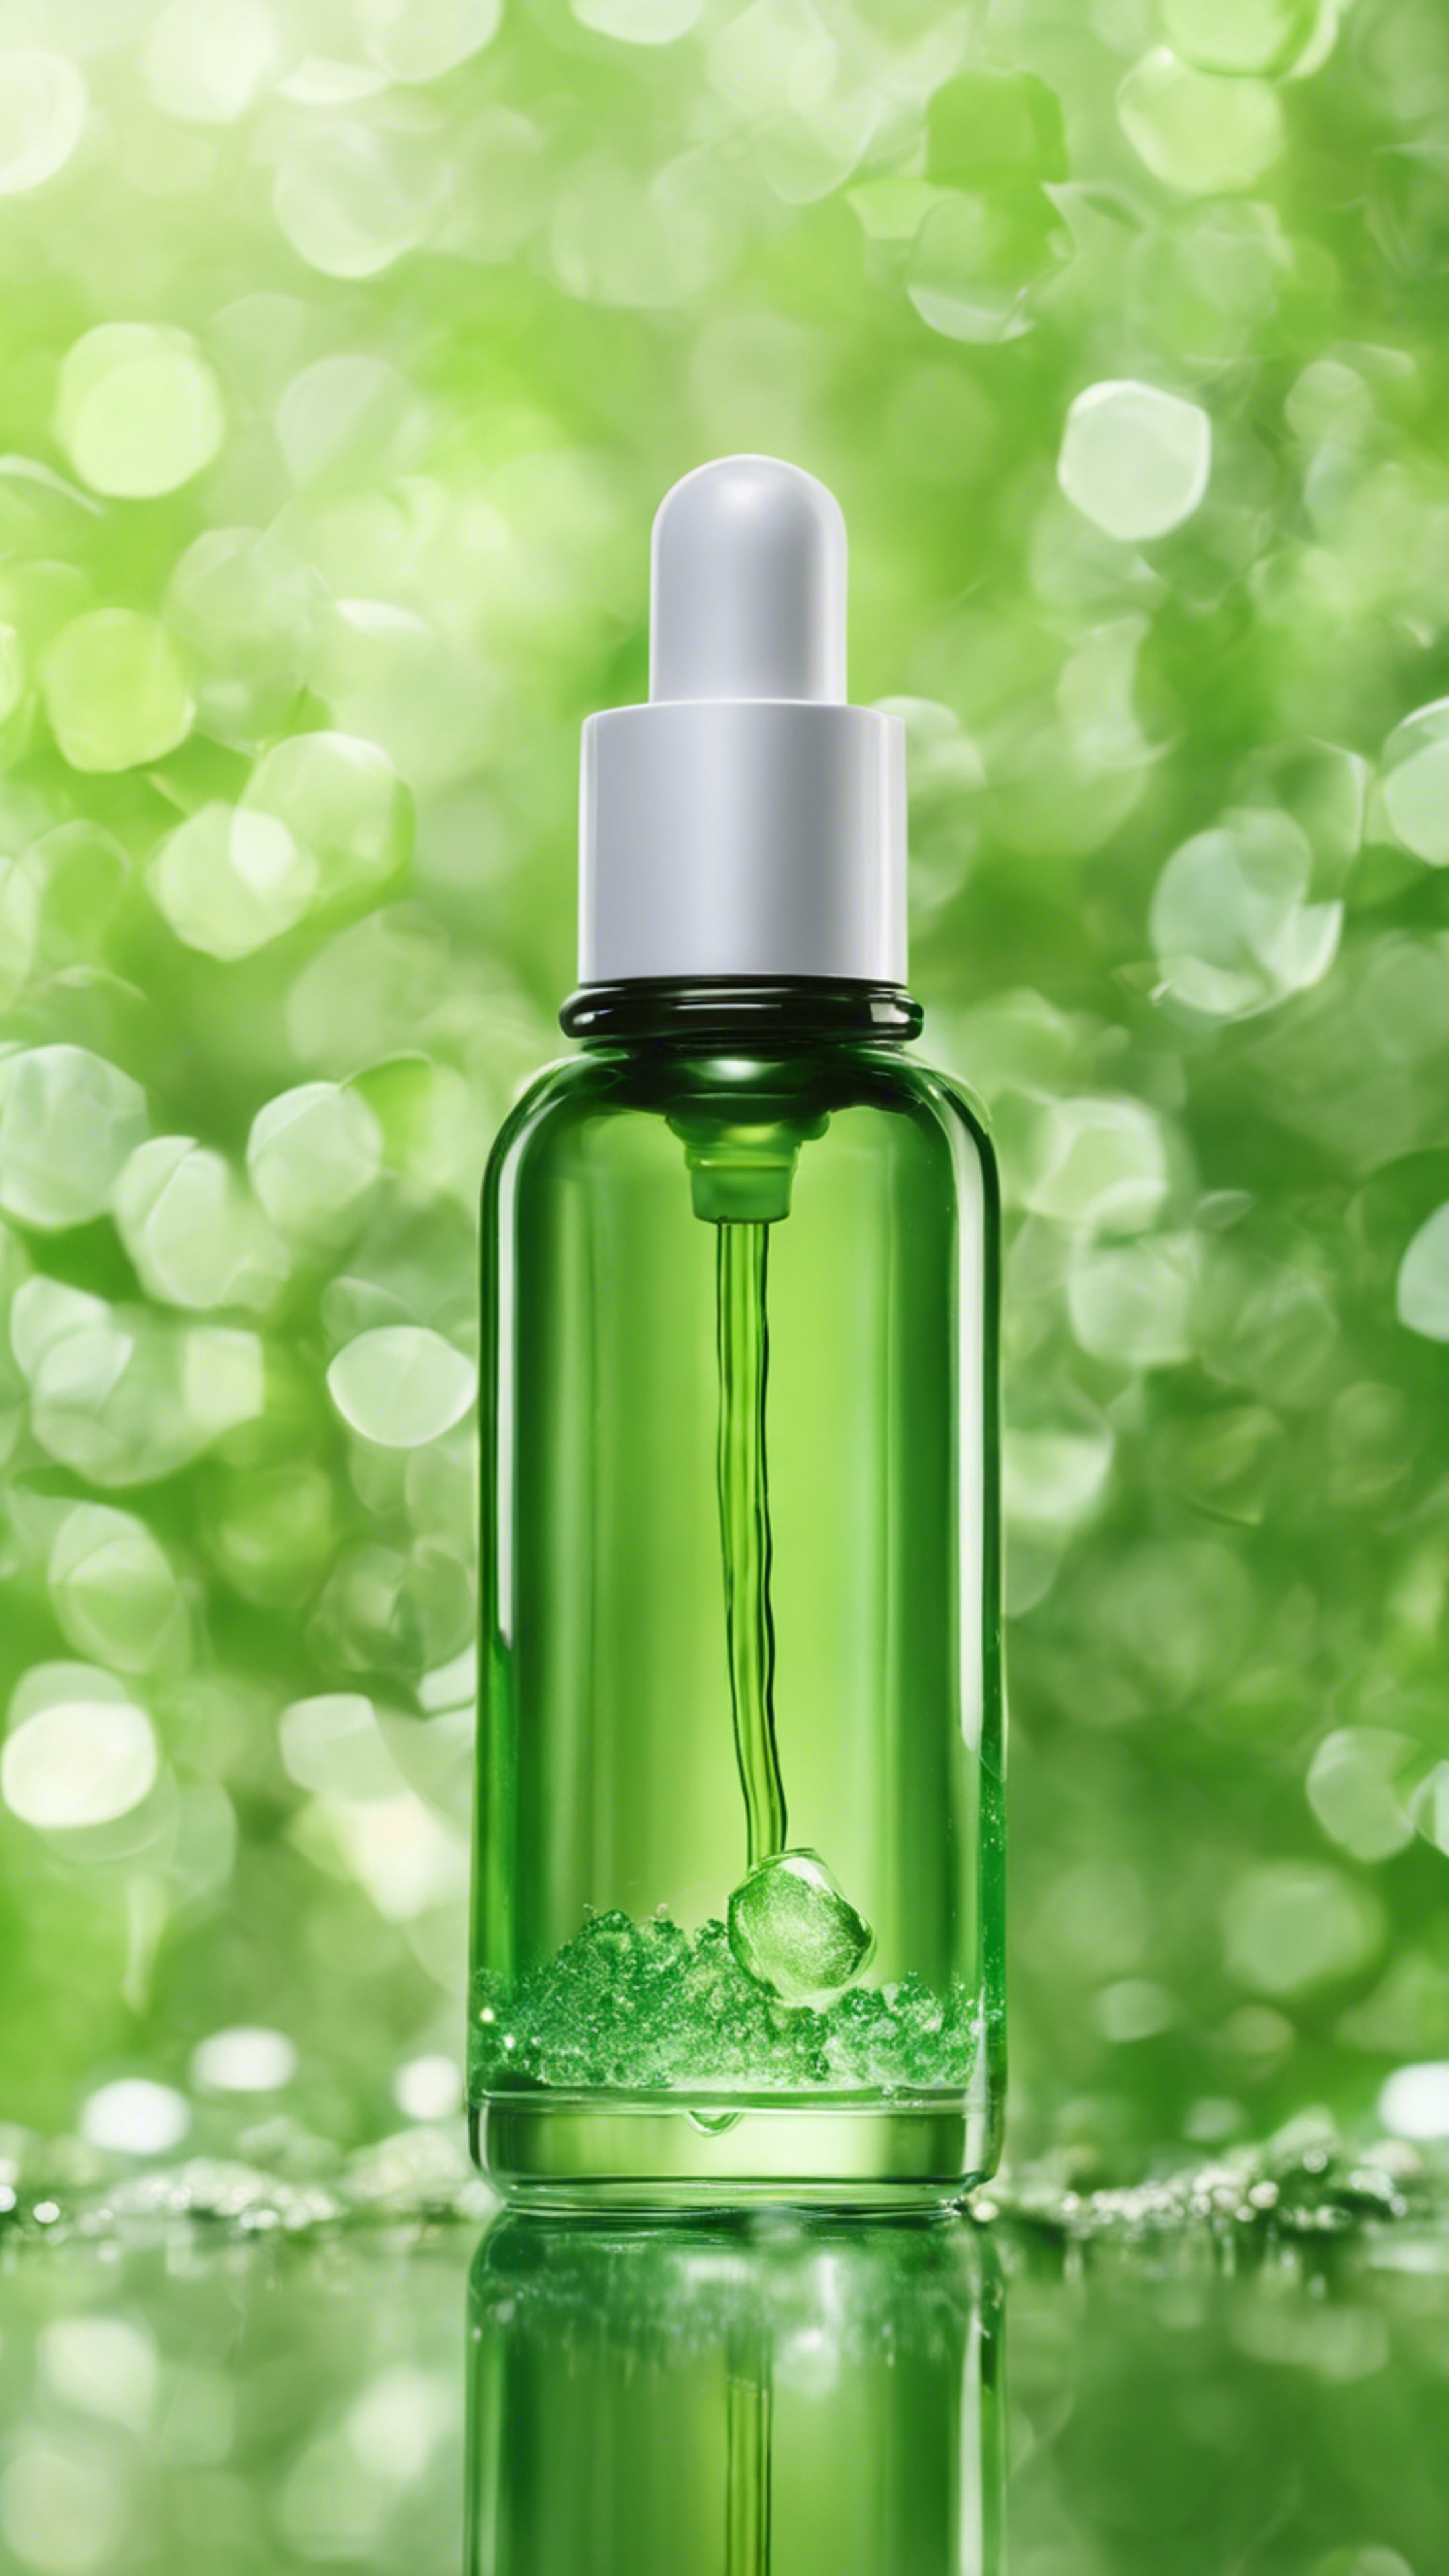 Green an eco-friendly cosmetics company's new hydrating face serum in a recyclable glass bottle. 墙纸[04a9344189e843ad9259]